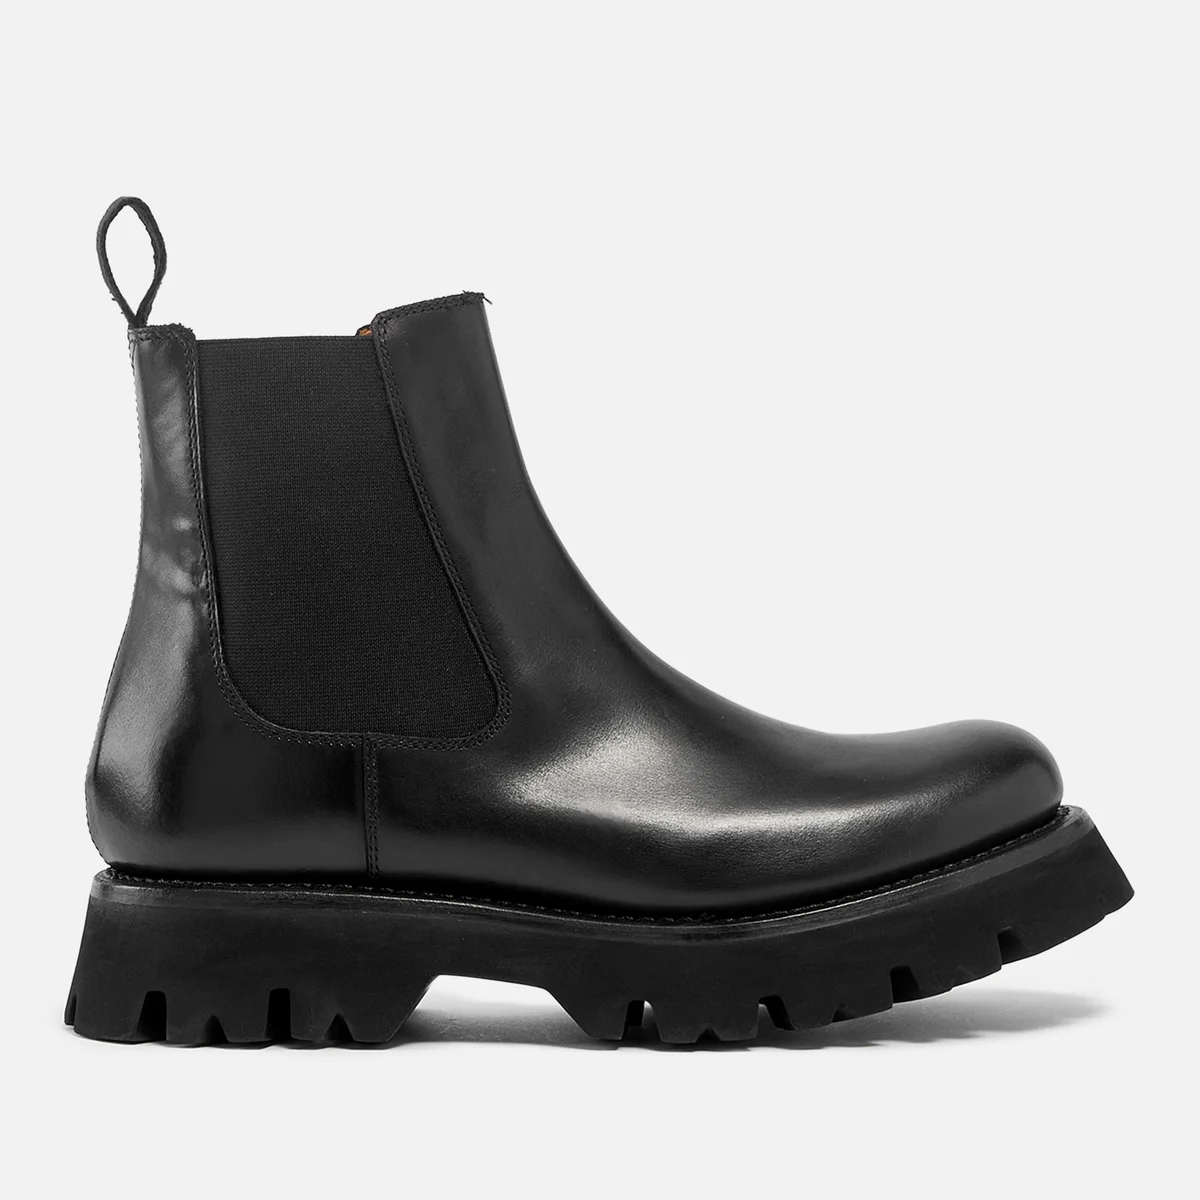 Grenson Harlow Leather Chelsea Boots Image 1